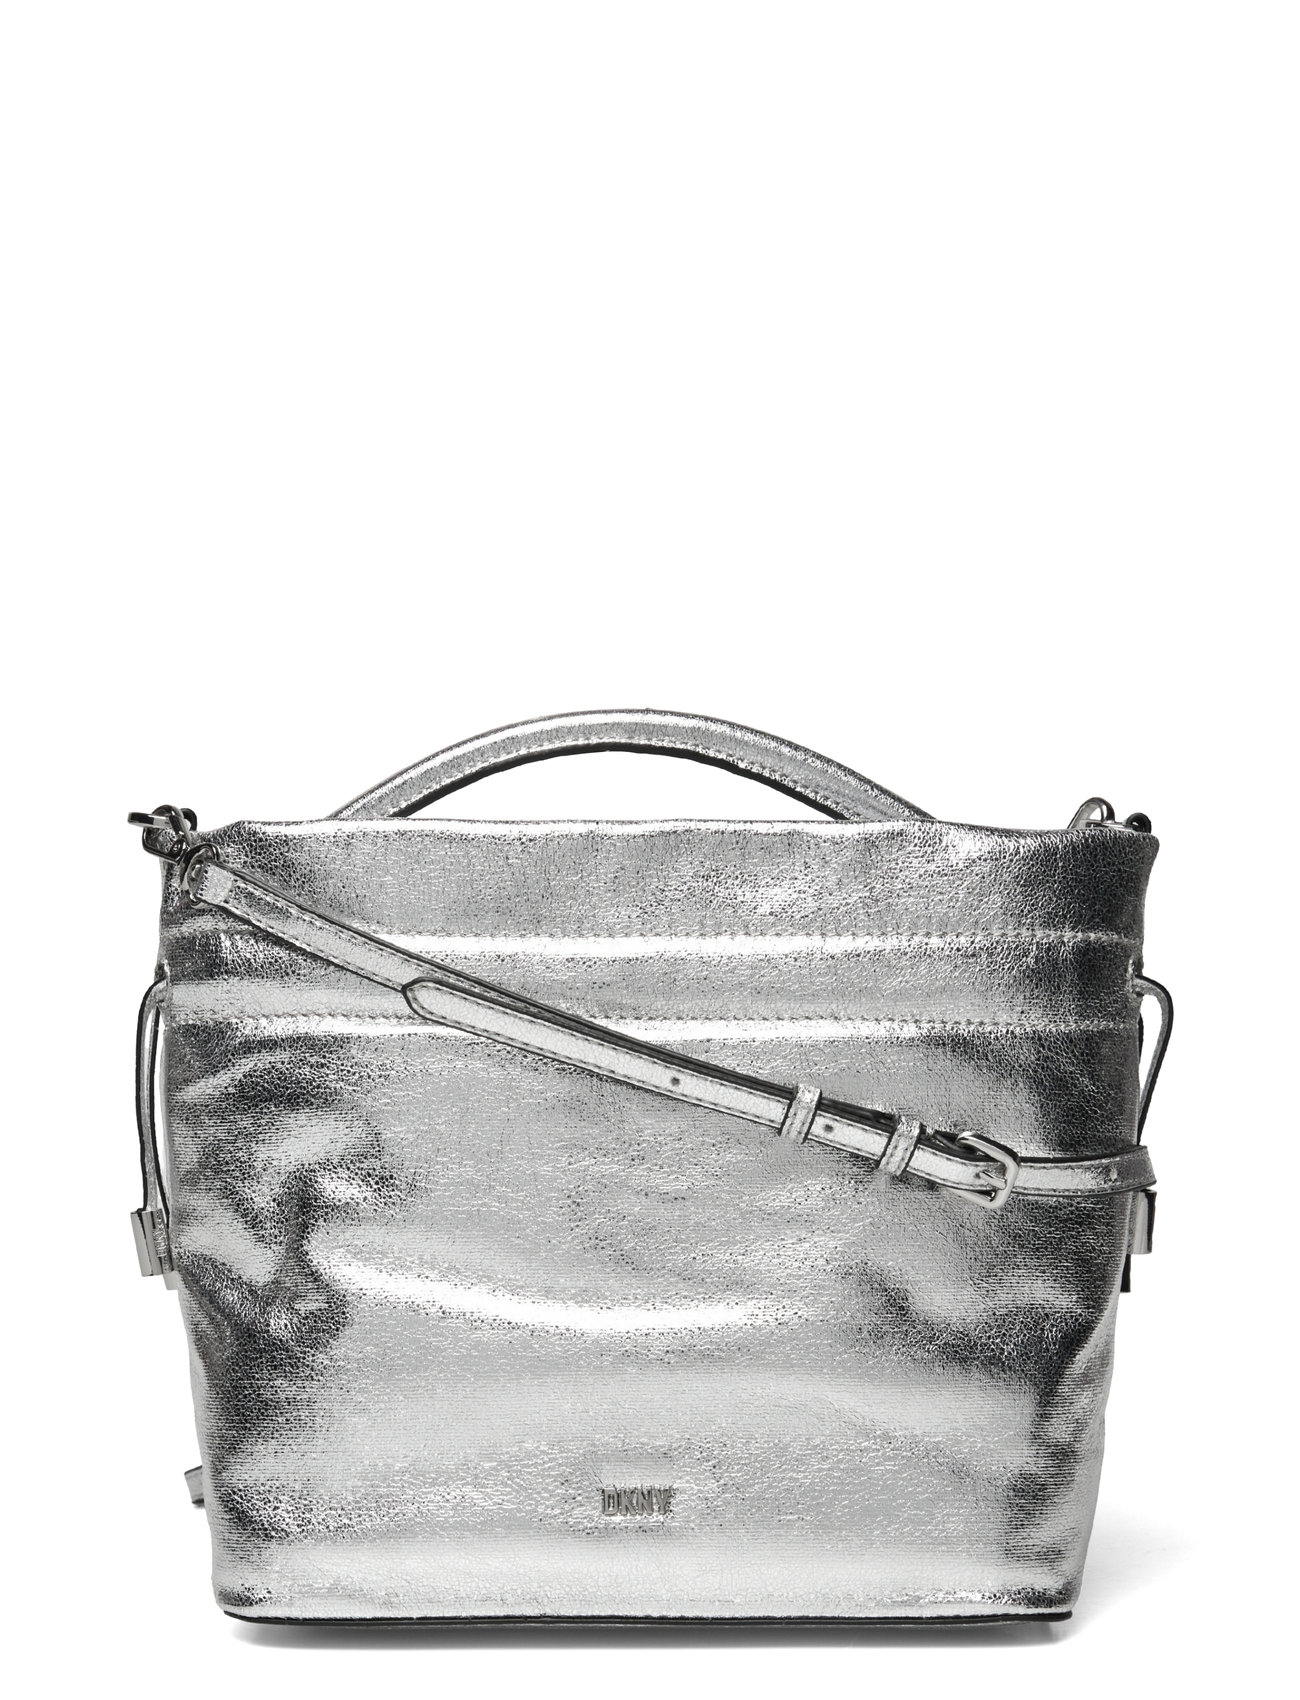 Feven Th Cbody Bags Small Shoulder Bags-crossbody Bags Silver DKNY Bags